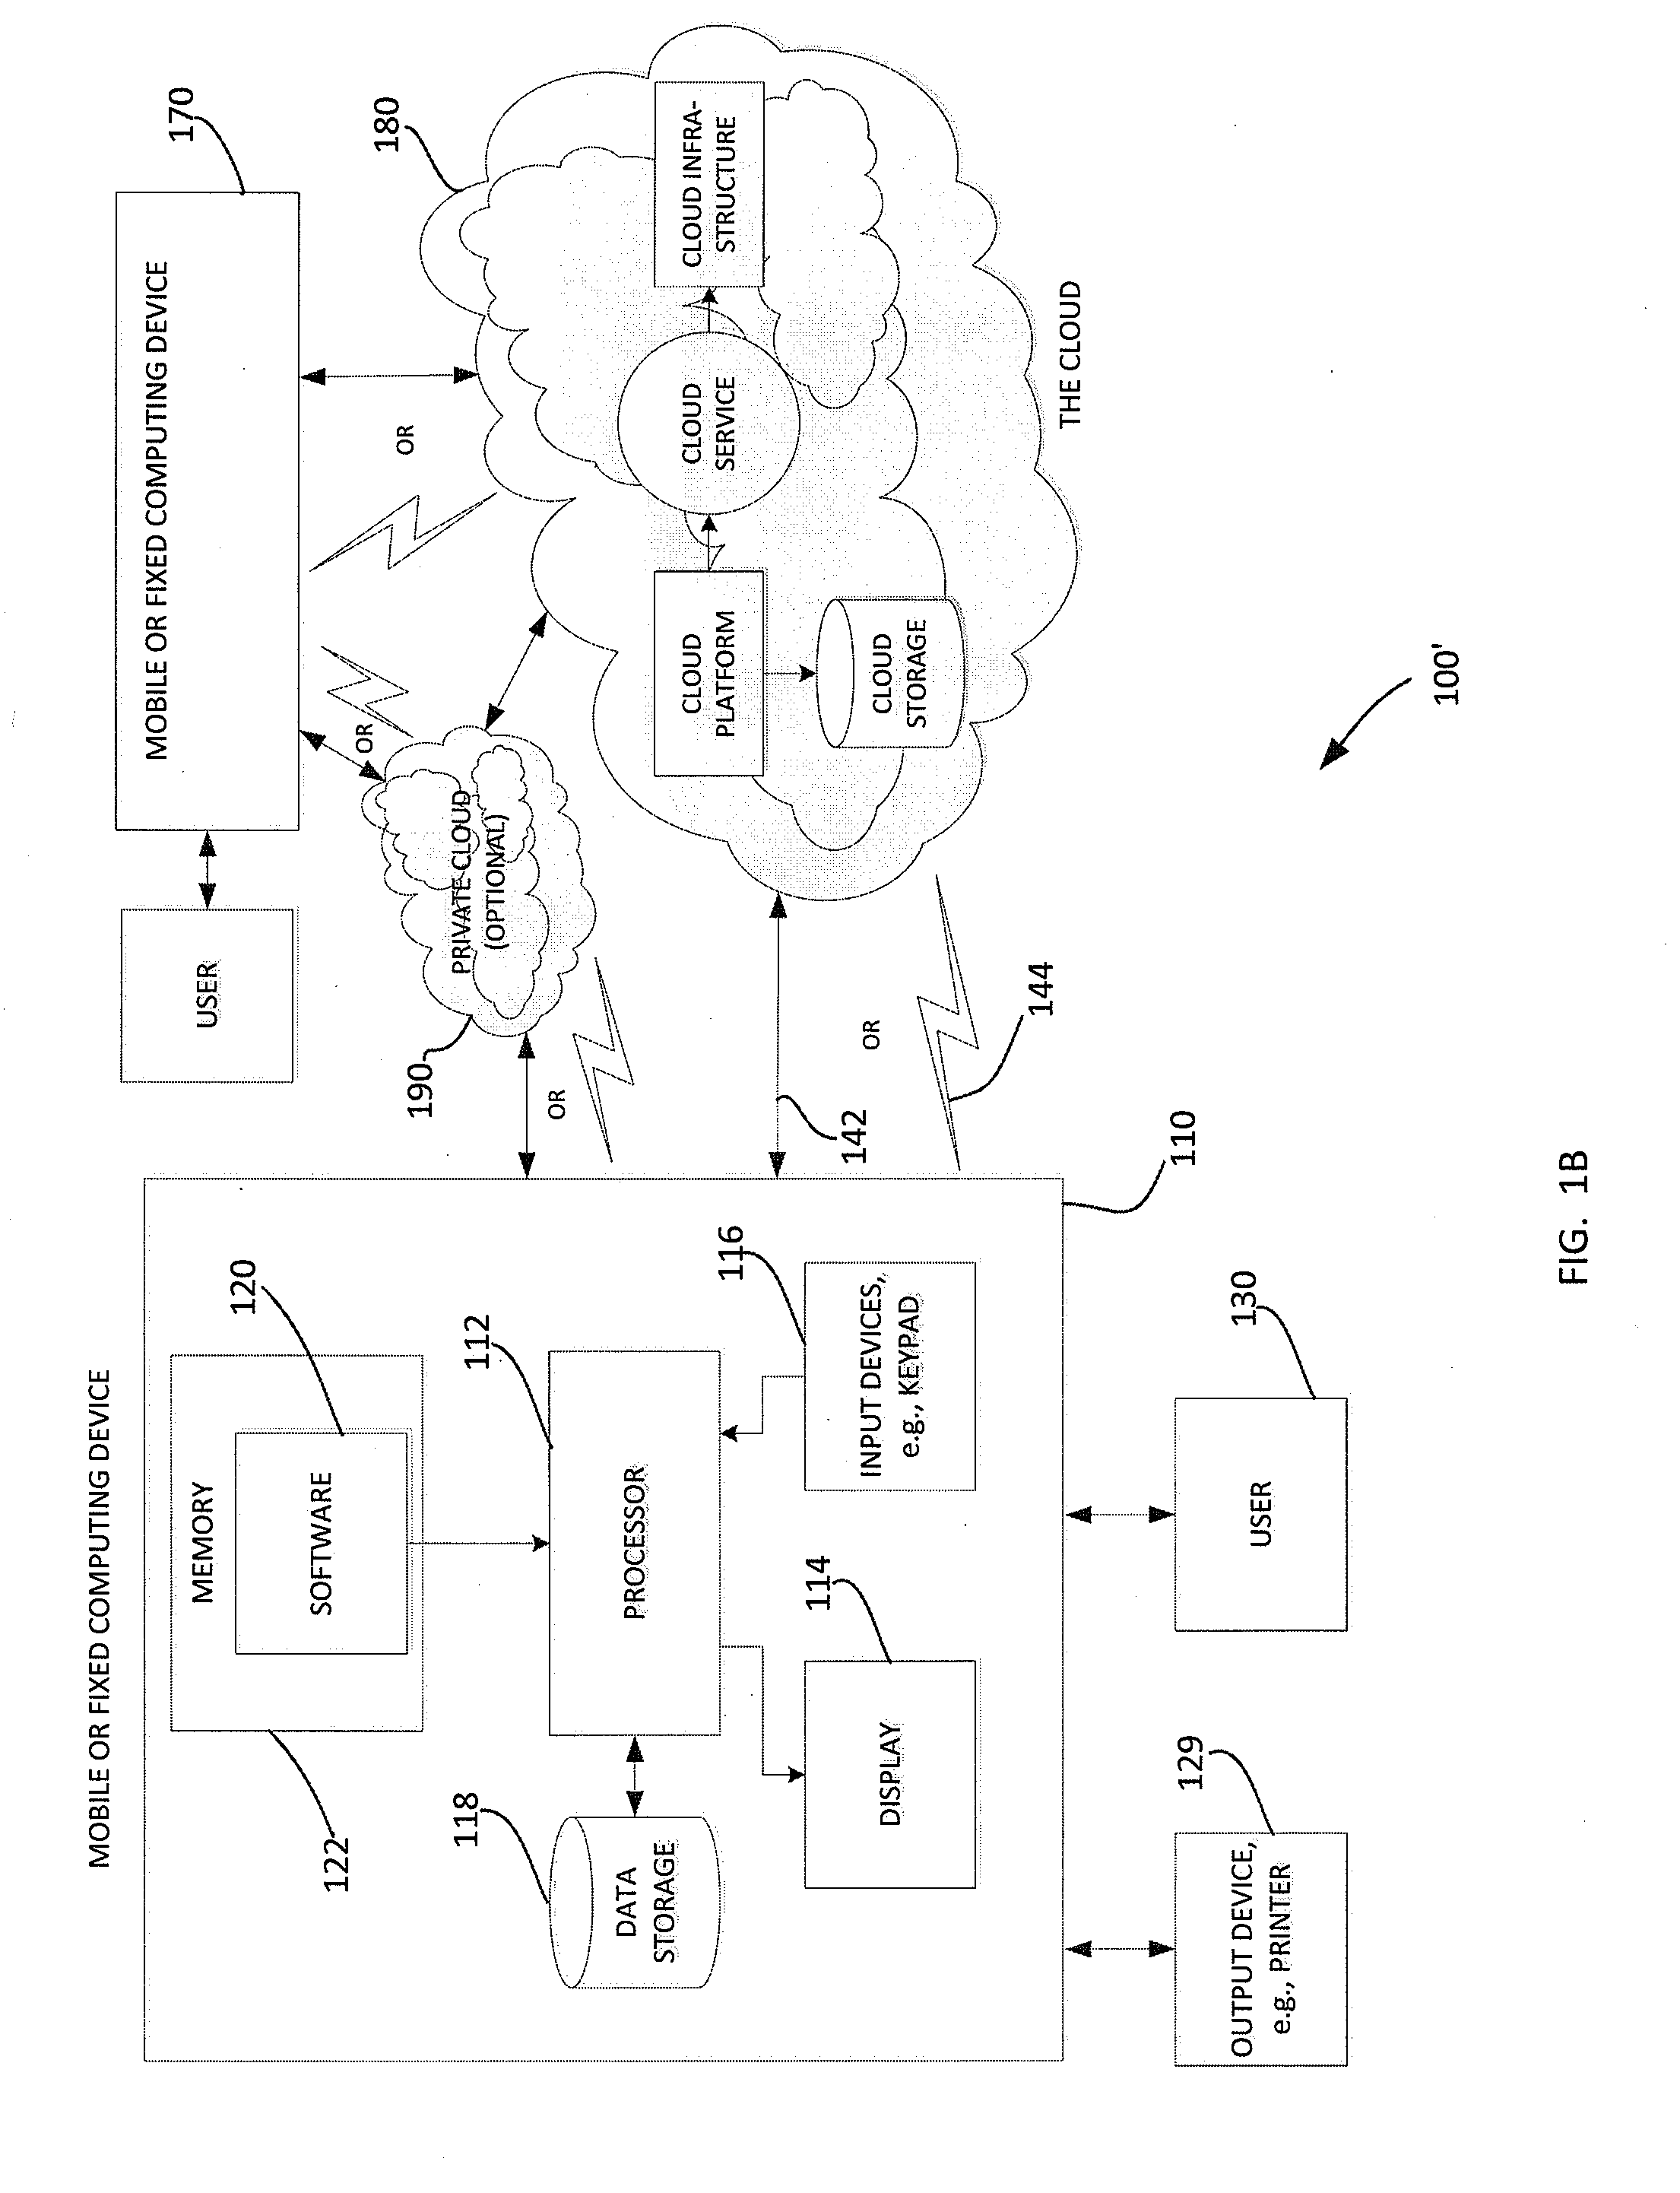 Genetic database system and method